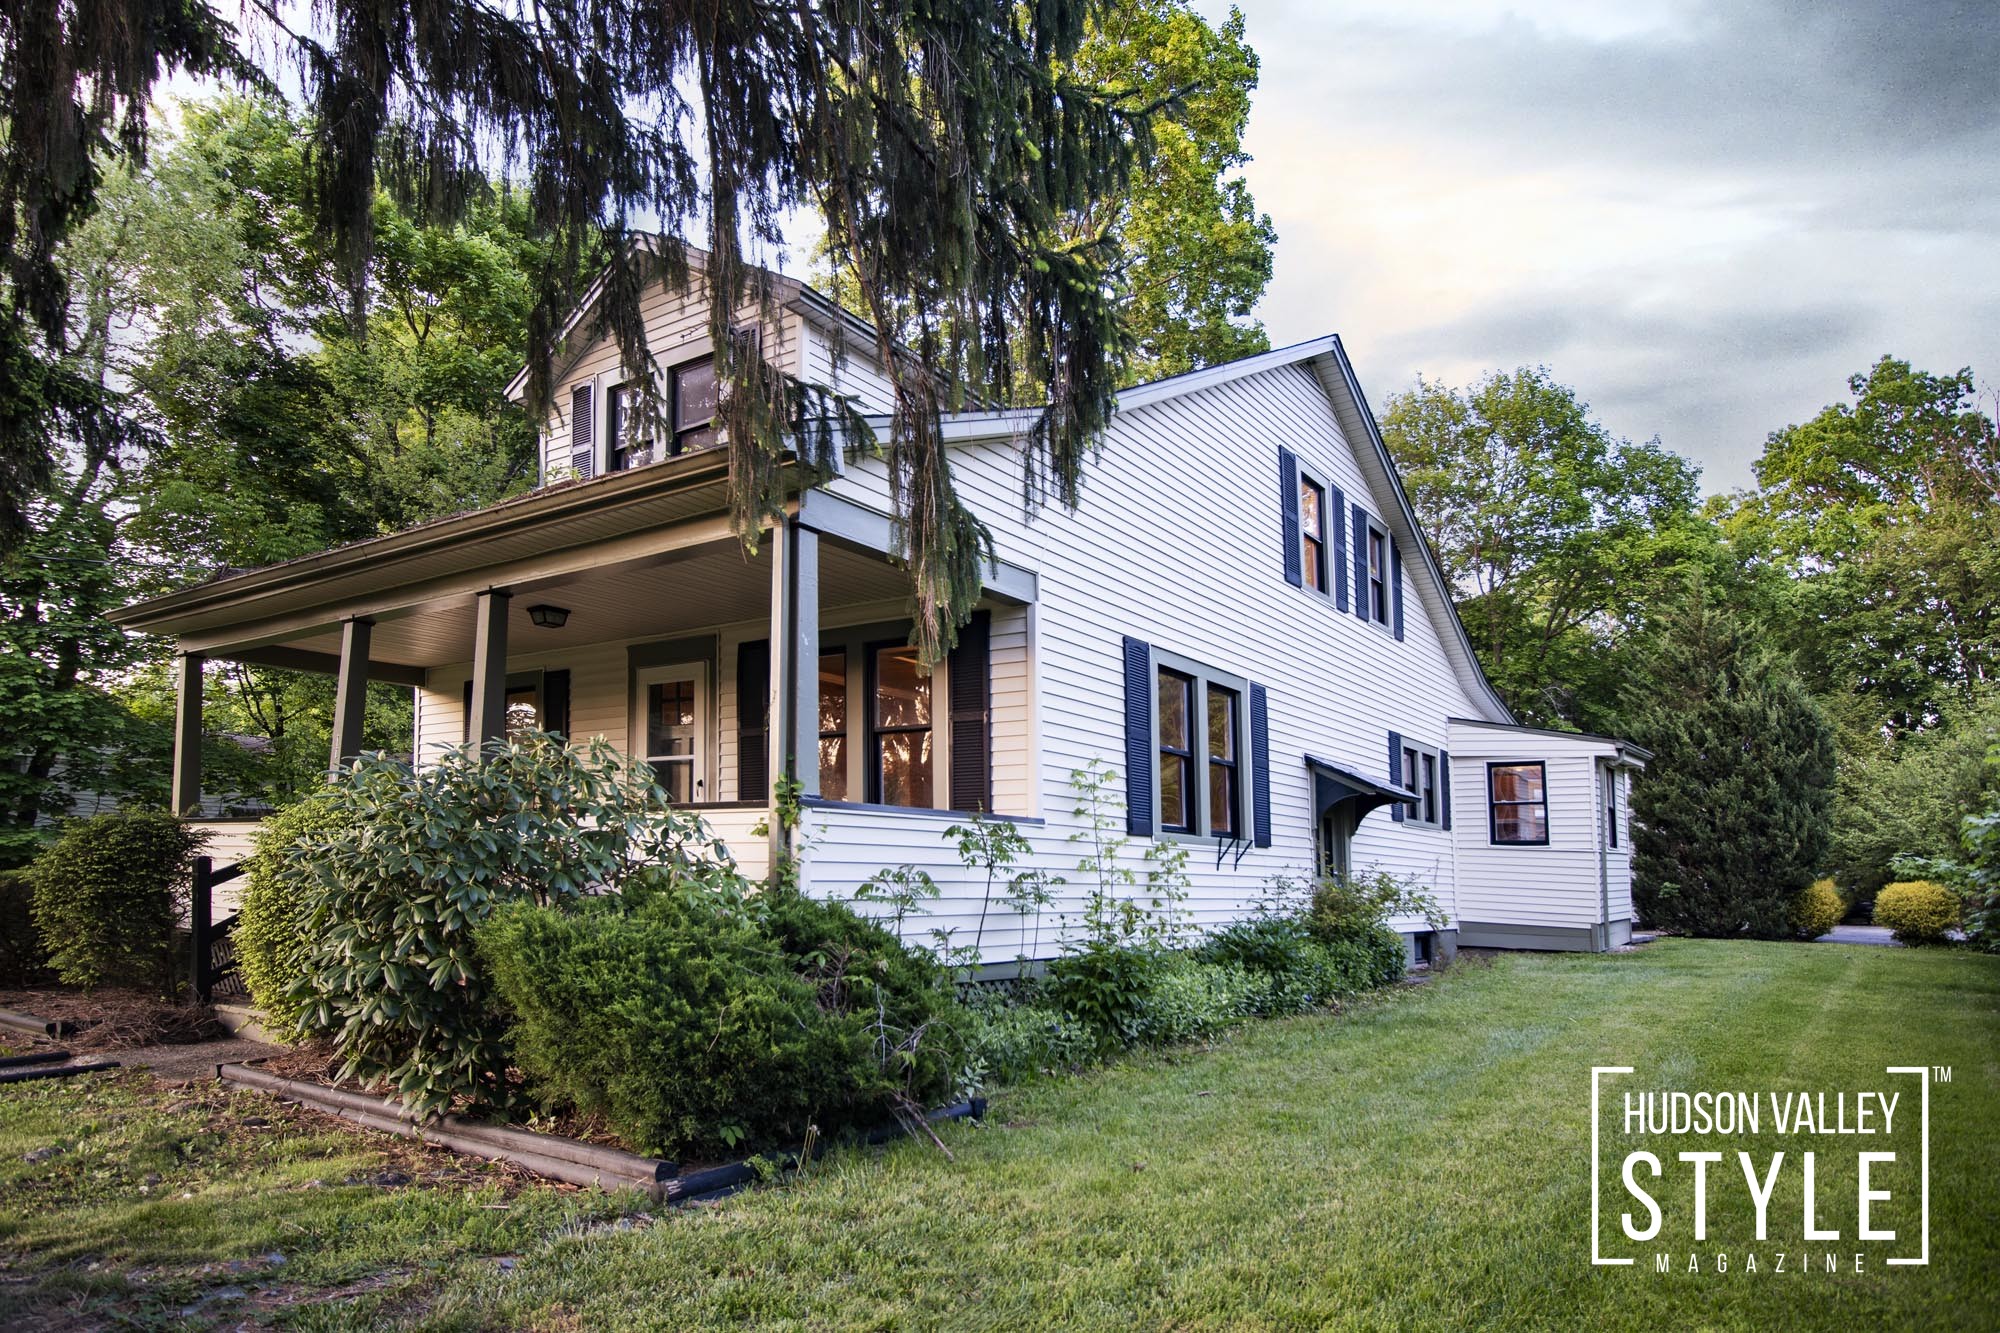 Hudson Valley Home for Sale in Newburgh, NY - Alexander Maxwell Realty - Dino Alexander